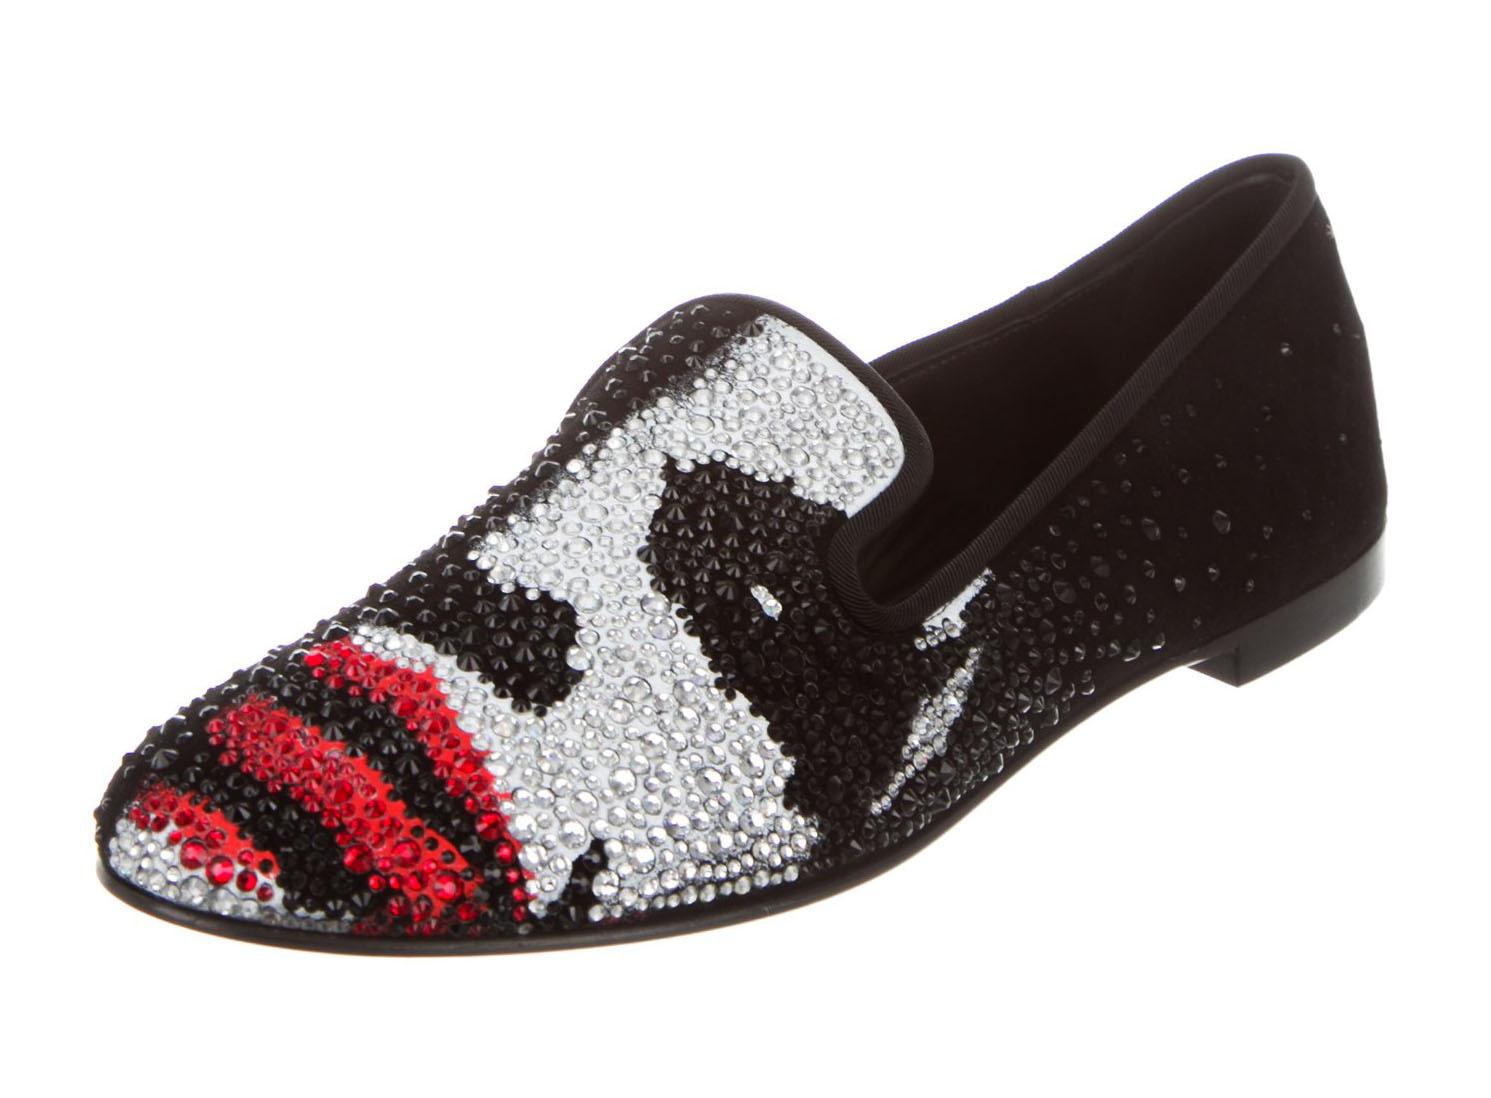 New and Limited Edition Giuseppe Zanotti *Joker* Women Swarovski Crystal Embellished Loafers
Designer size 38 - please know your size by this designer
Red, Clear and Black Swarovski Crystals Embellishment Over the Black Suede, Padded Leather Lining,